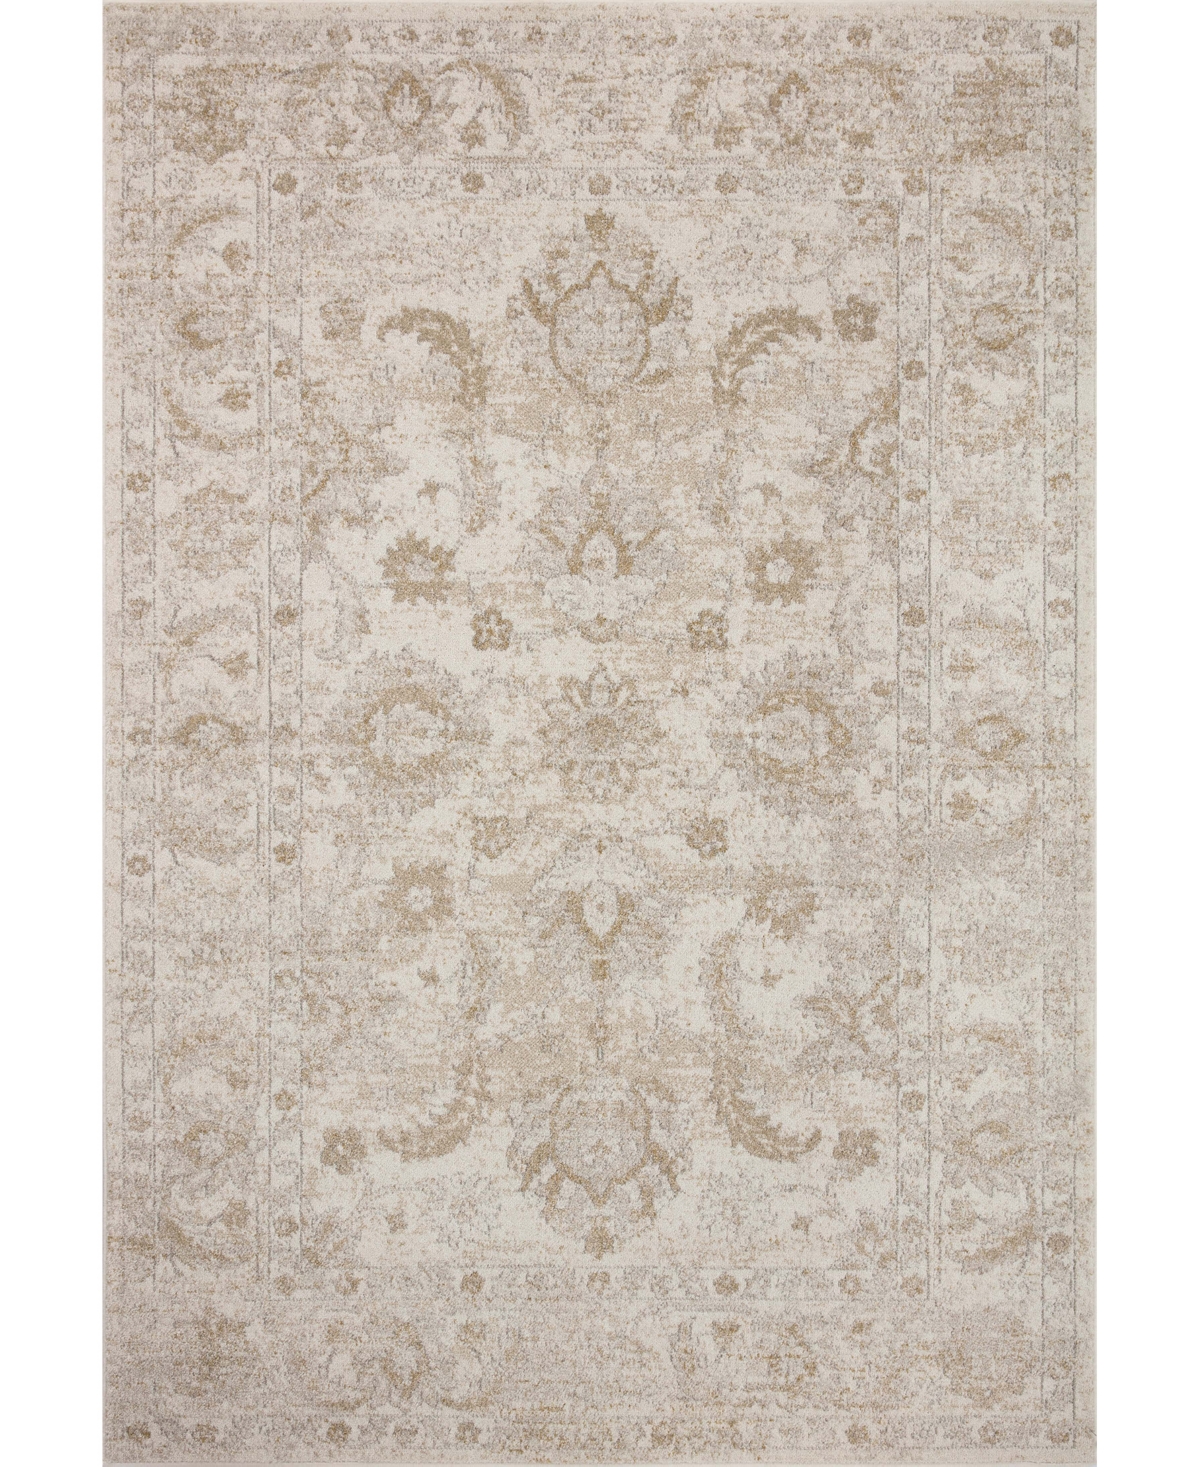 Loloi Ii Odette Odt-03 4' X 6' Area Rug In Ivory